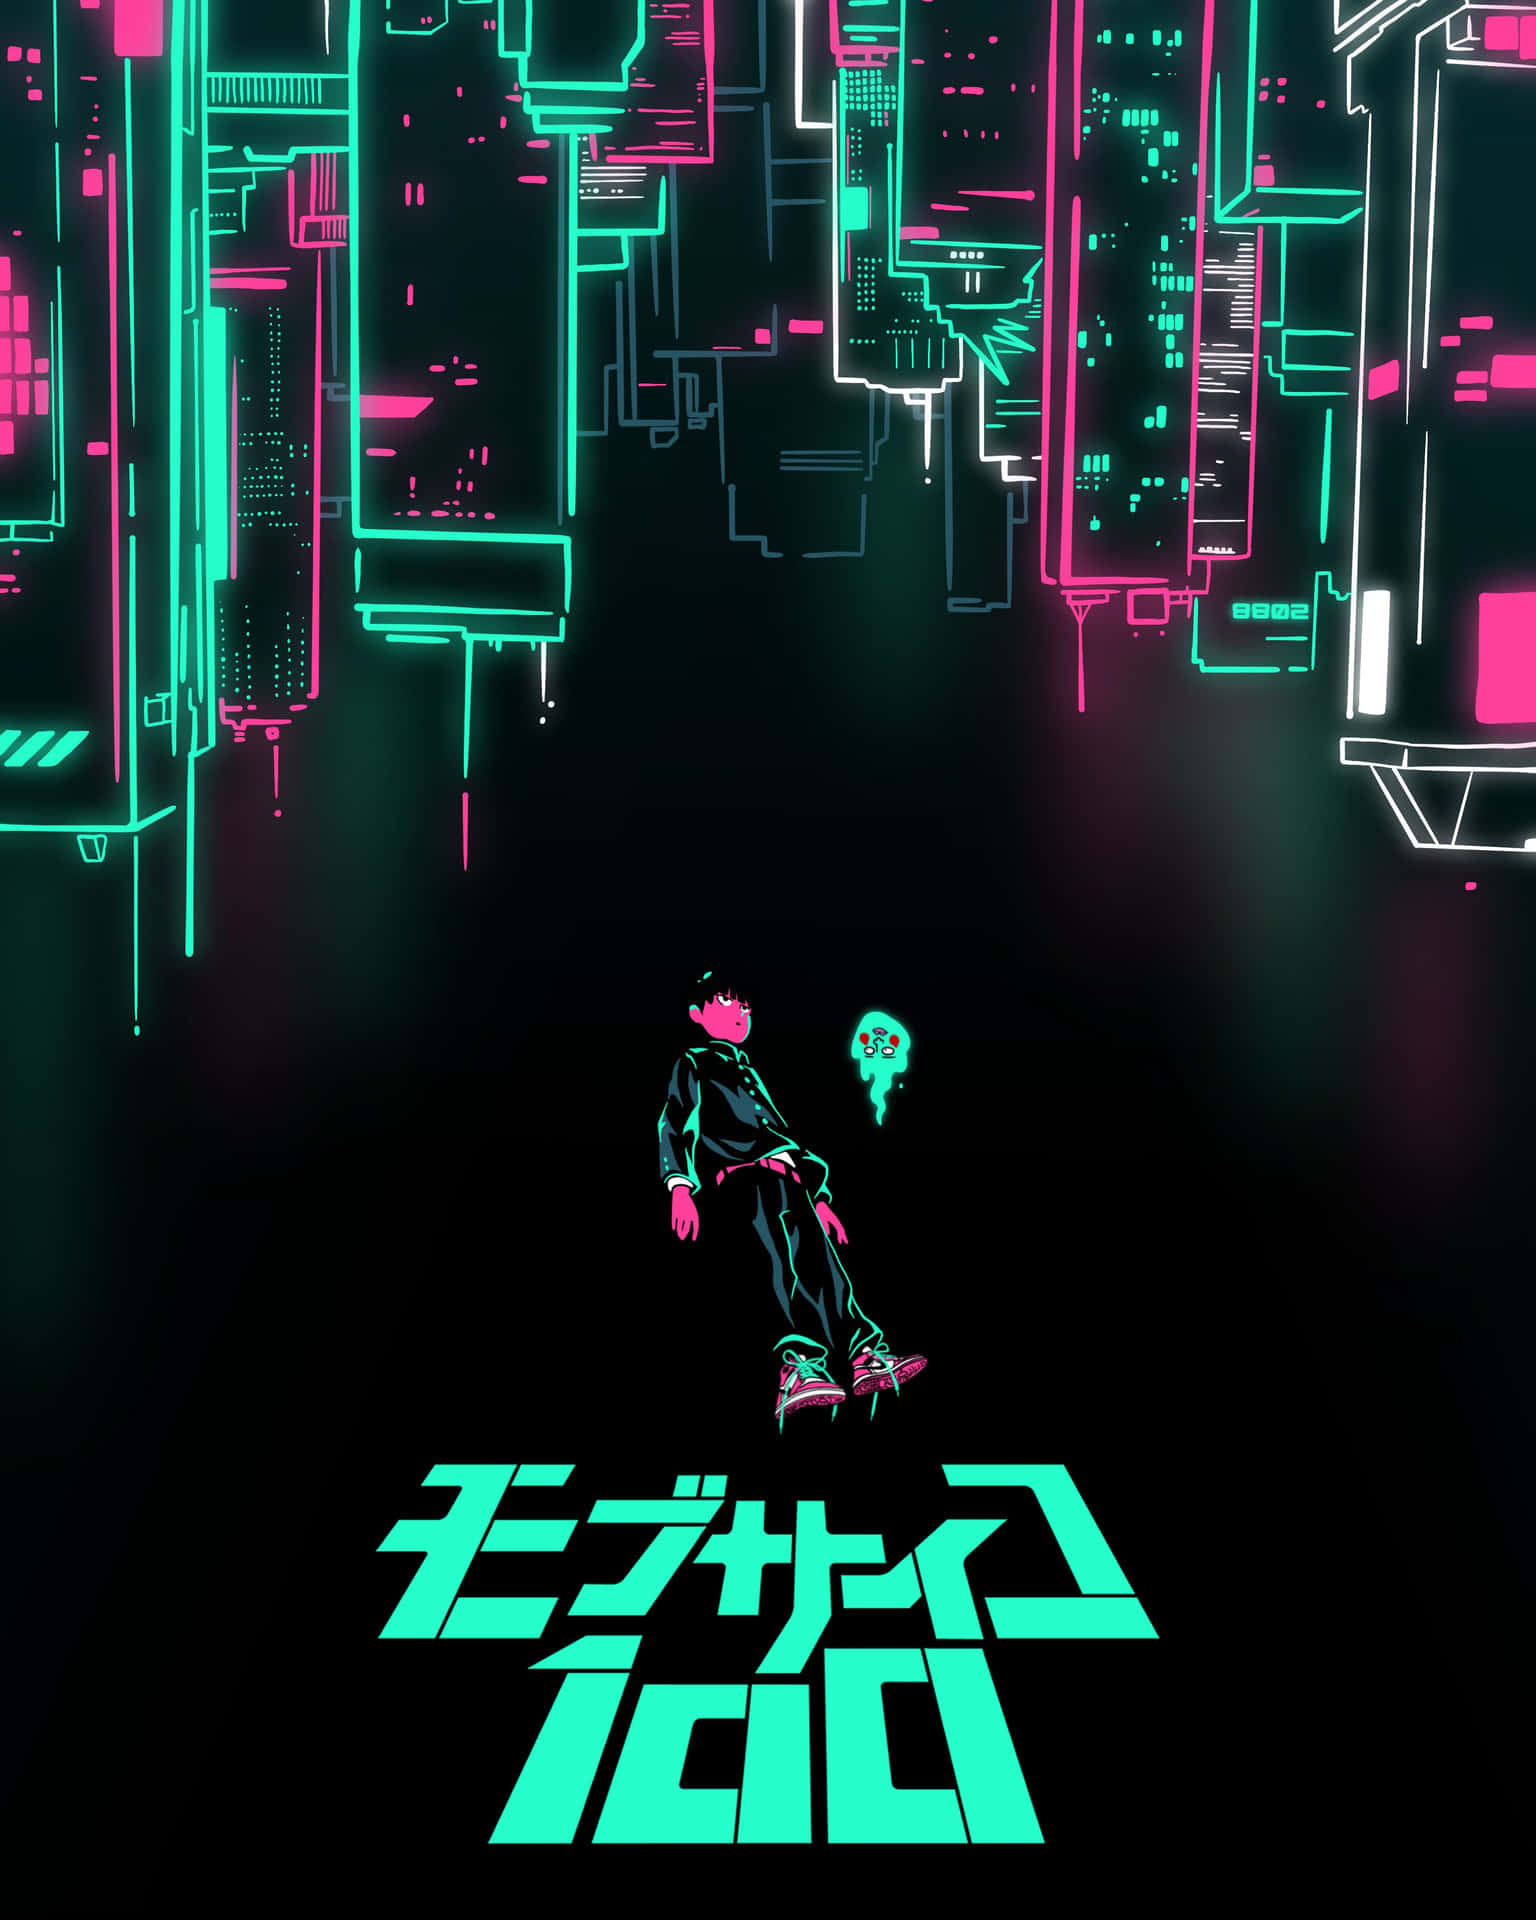 A Neon City With A Skateboarder On Top Wallpaper